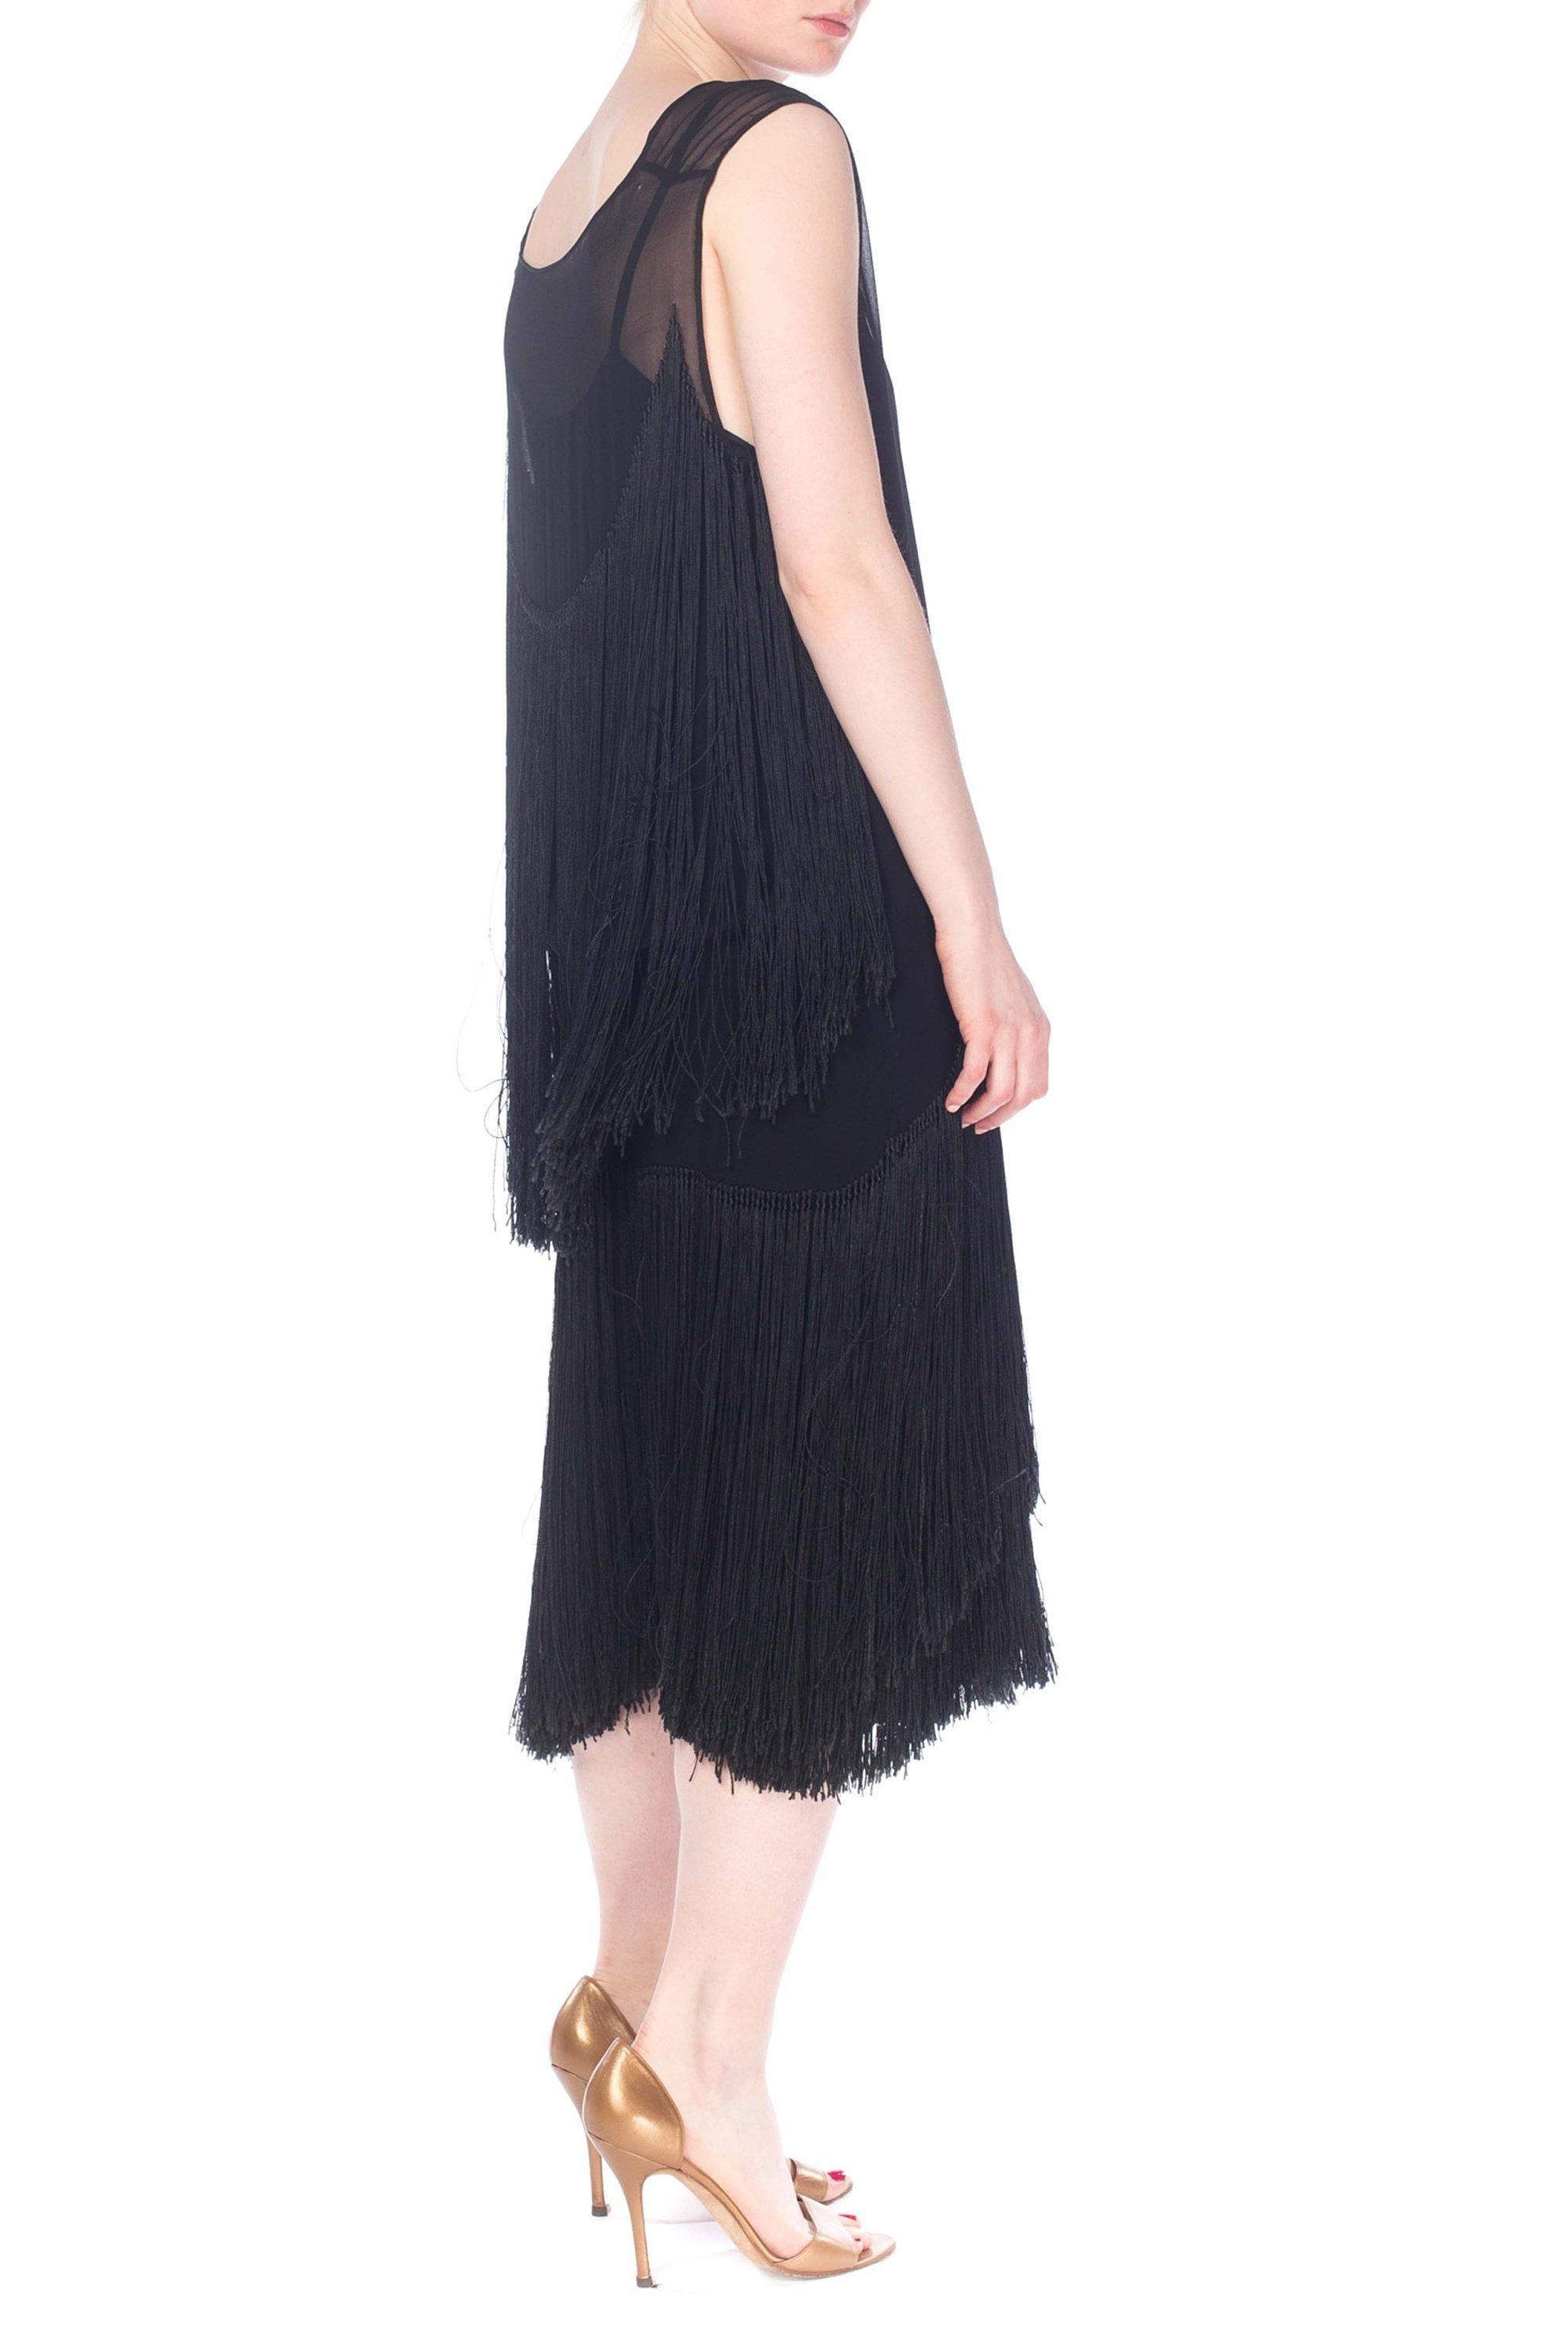 1920S Black Silk Chiffon Cocktail Dress With Fringe Skirt And Back Cape 1